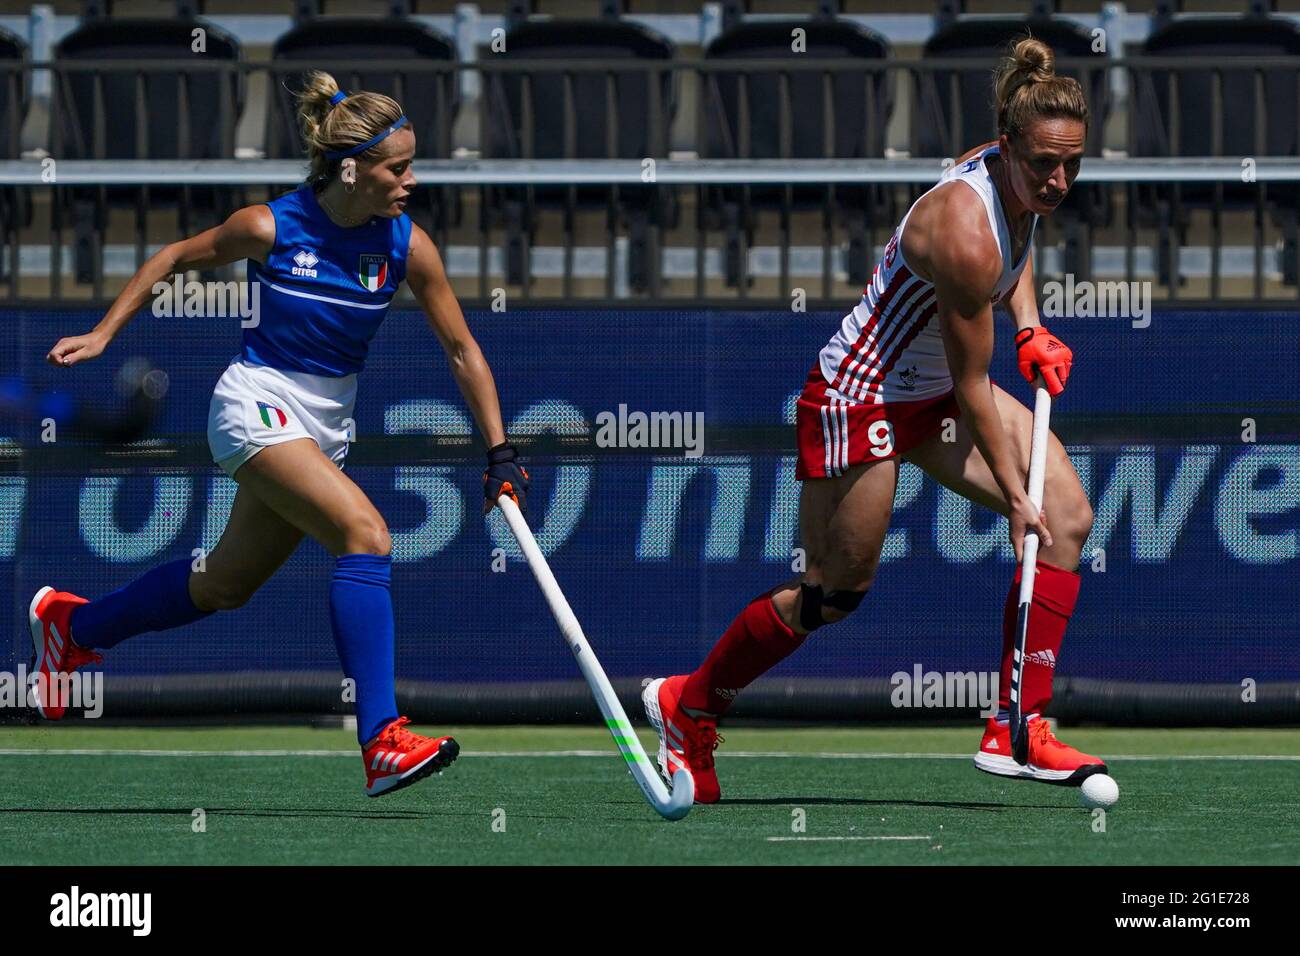 AMSTELVEEN, NETHERLANDS - JUNE 6: Susannah Townsend of England during the Euro Hockey Championships match between England and Italy at Wagener Stadion Stock Photo